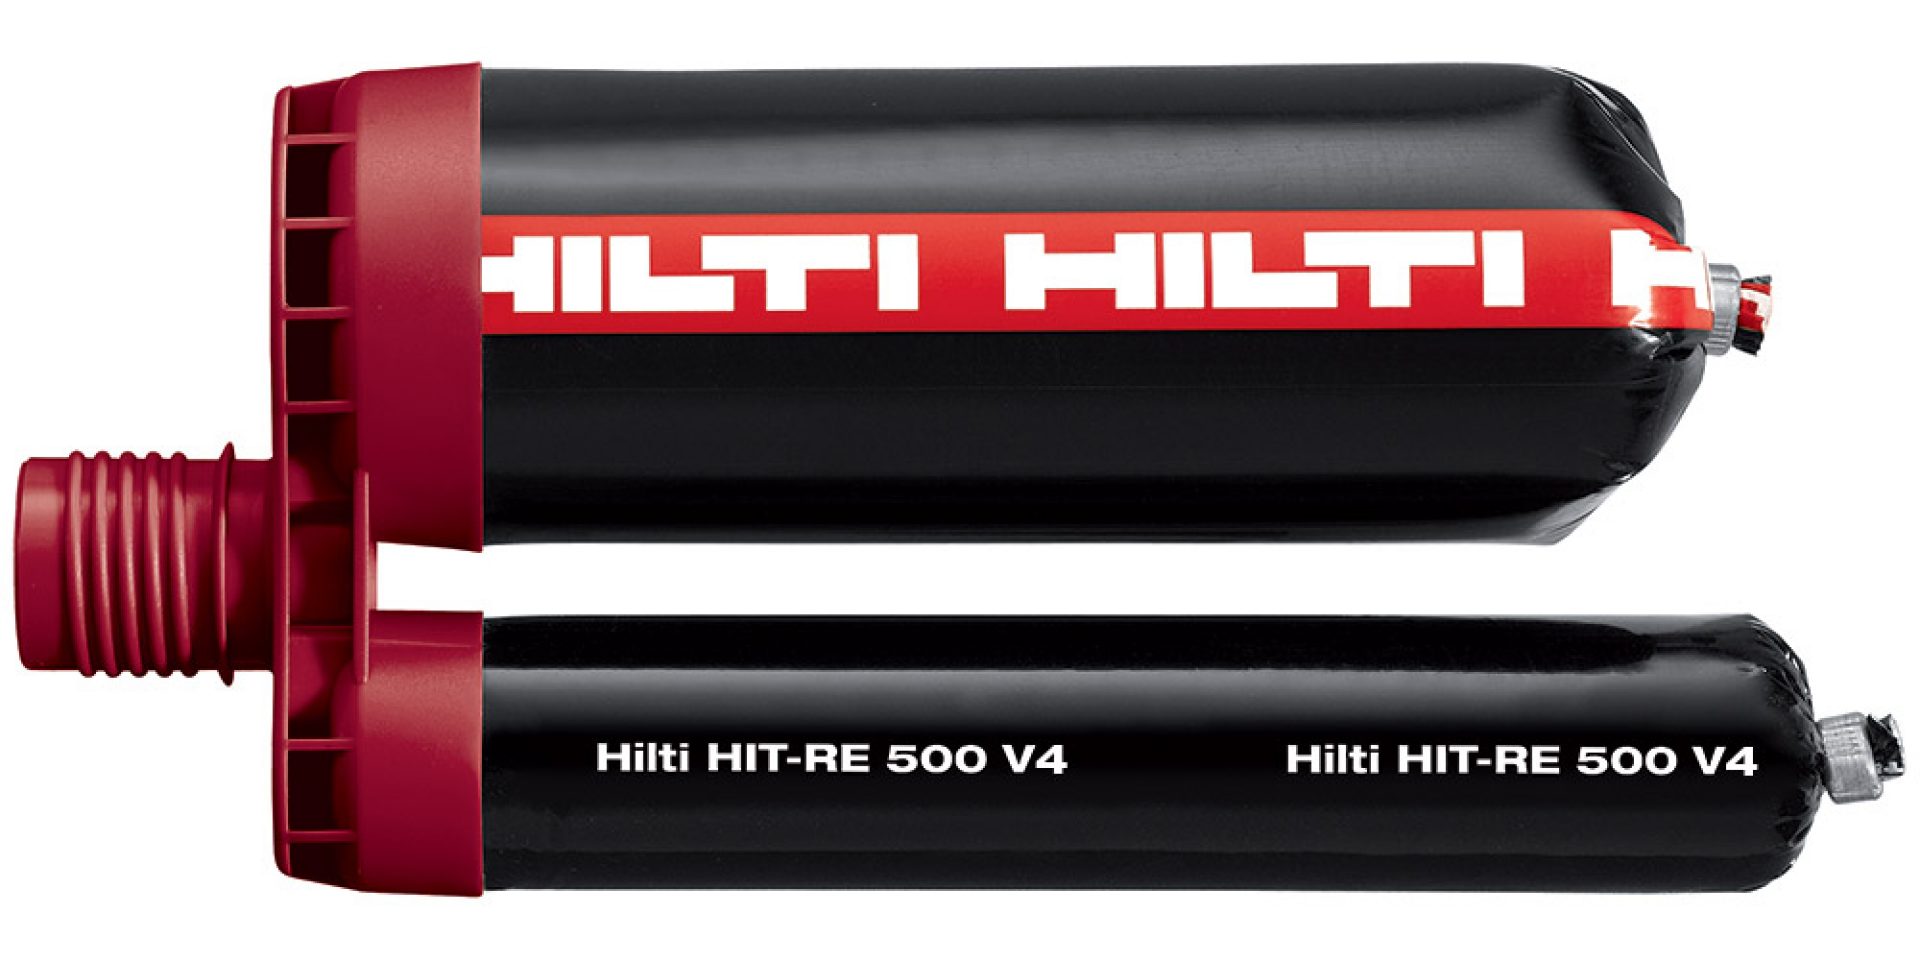 Hilti injectable mortar HIT-RE 500 V4